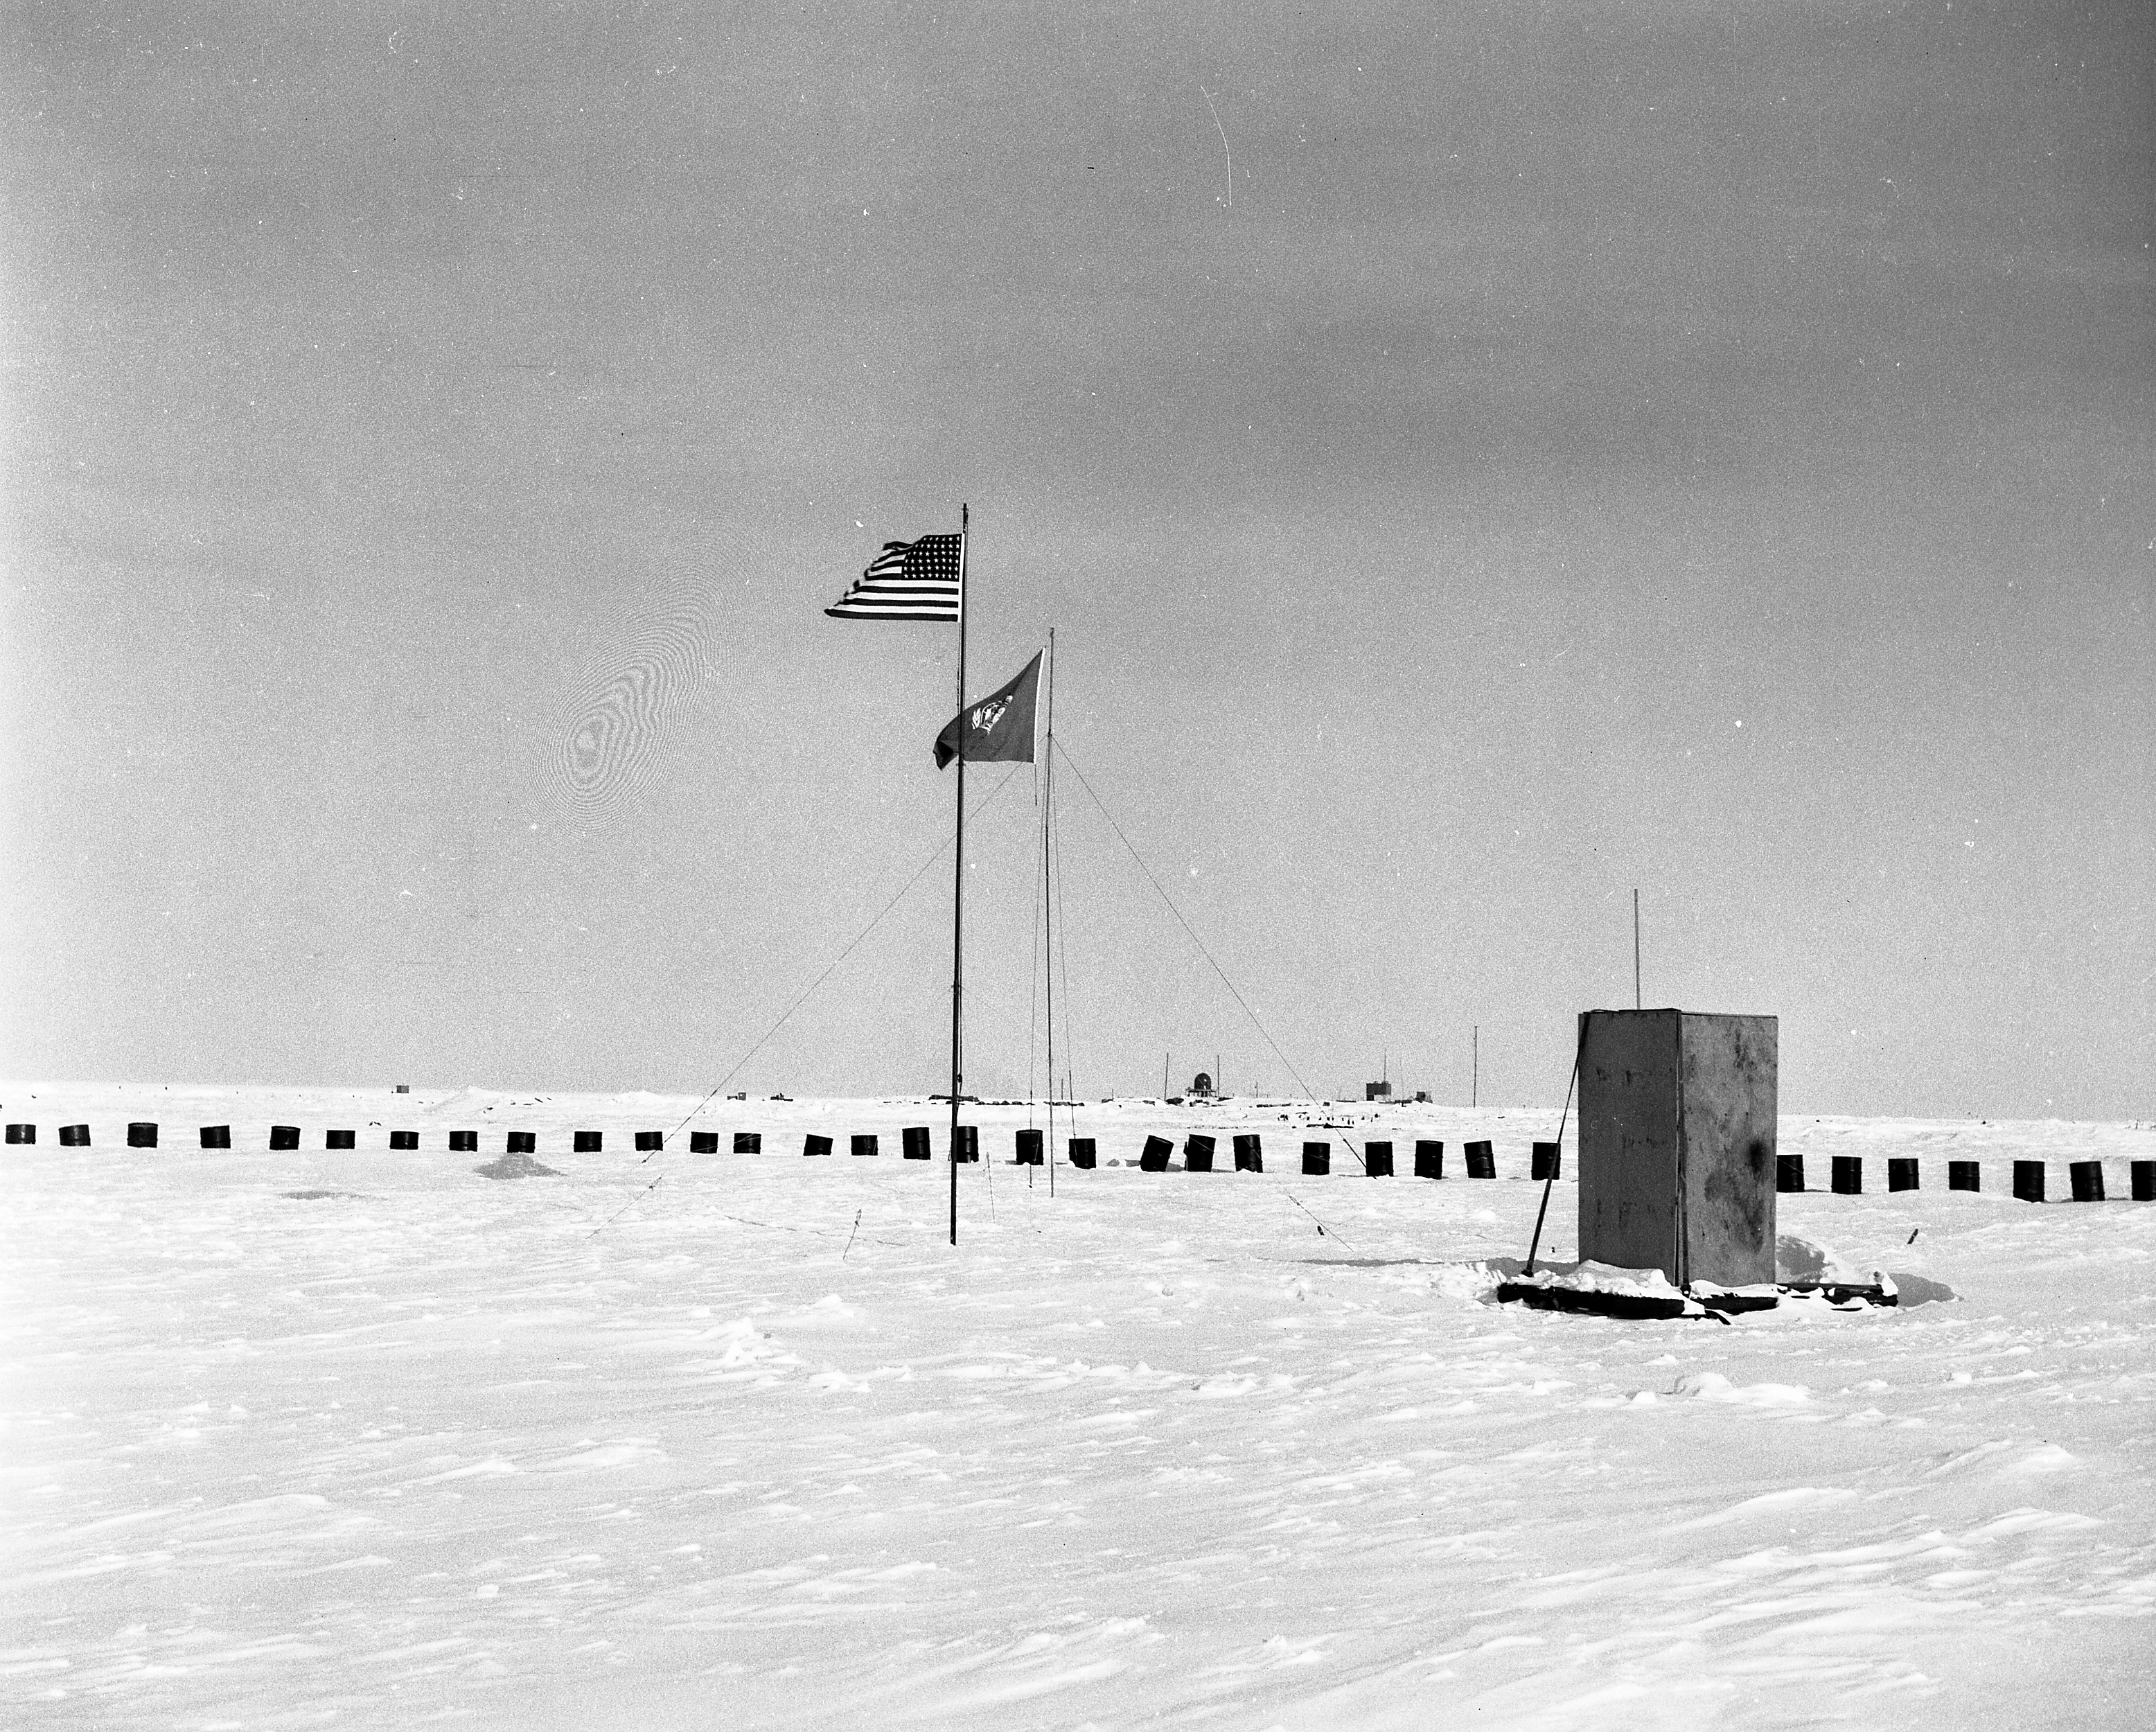 Flags and objects on snow.